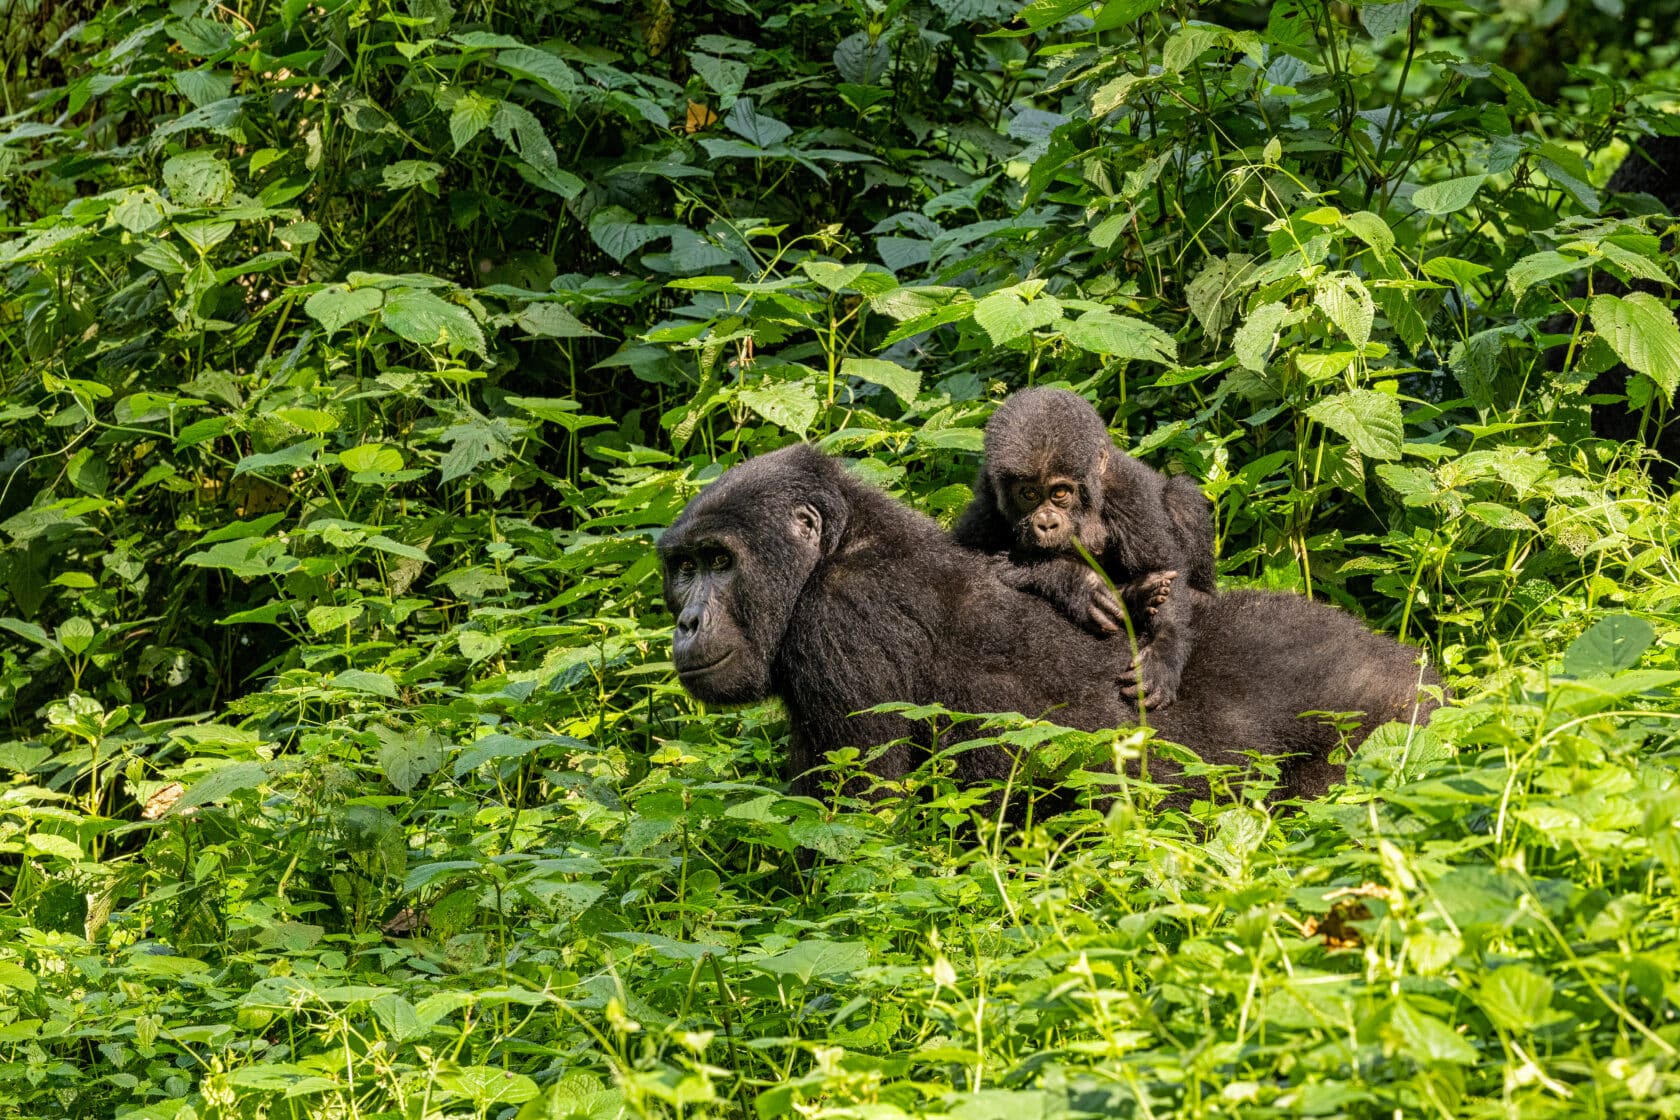 Adult female gorilla with baby, Gorilla beringei beringei, in the lush foliage of the Bwindi Impenetrable forest, Uganda. Members of the Muyambi family habituated group of the conservation programme